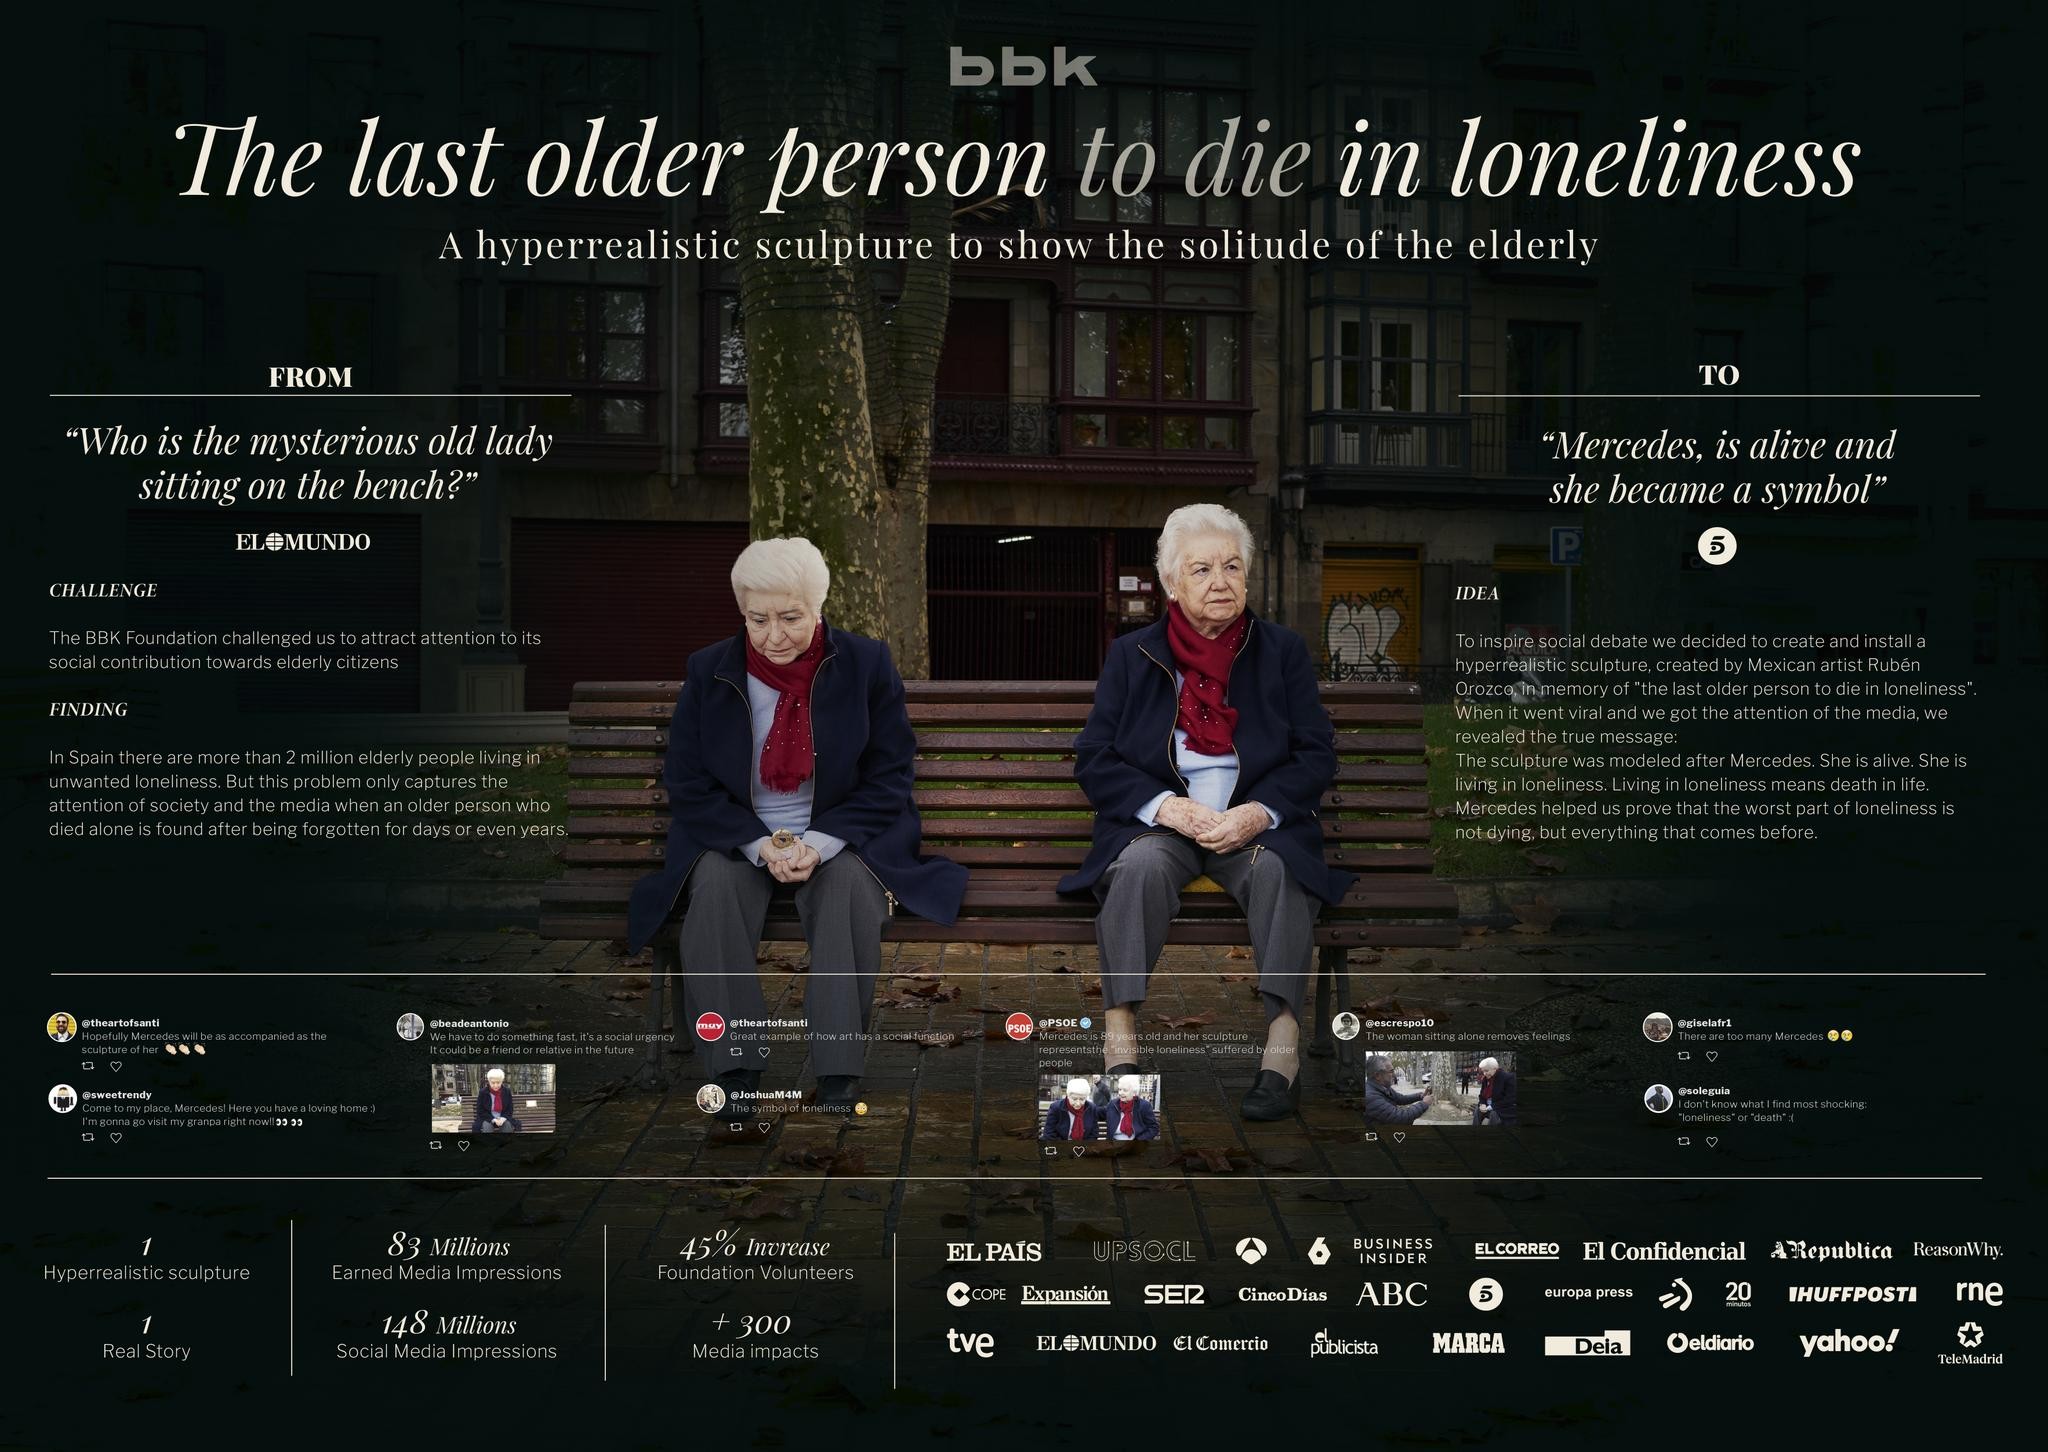 THE LAST OLDER PERSON TO DIE IN LONELINESS